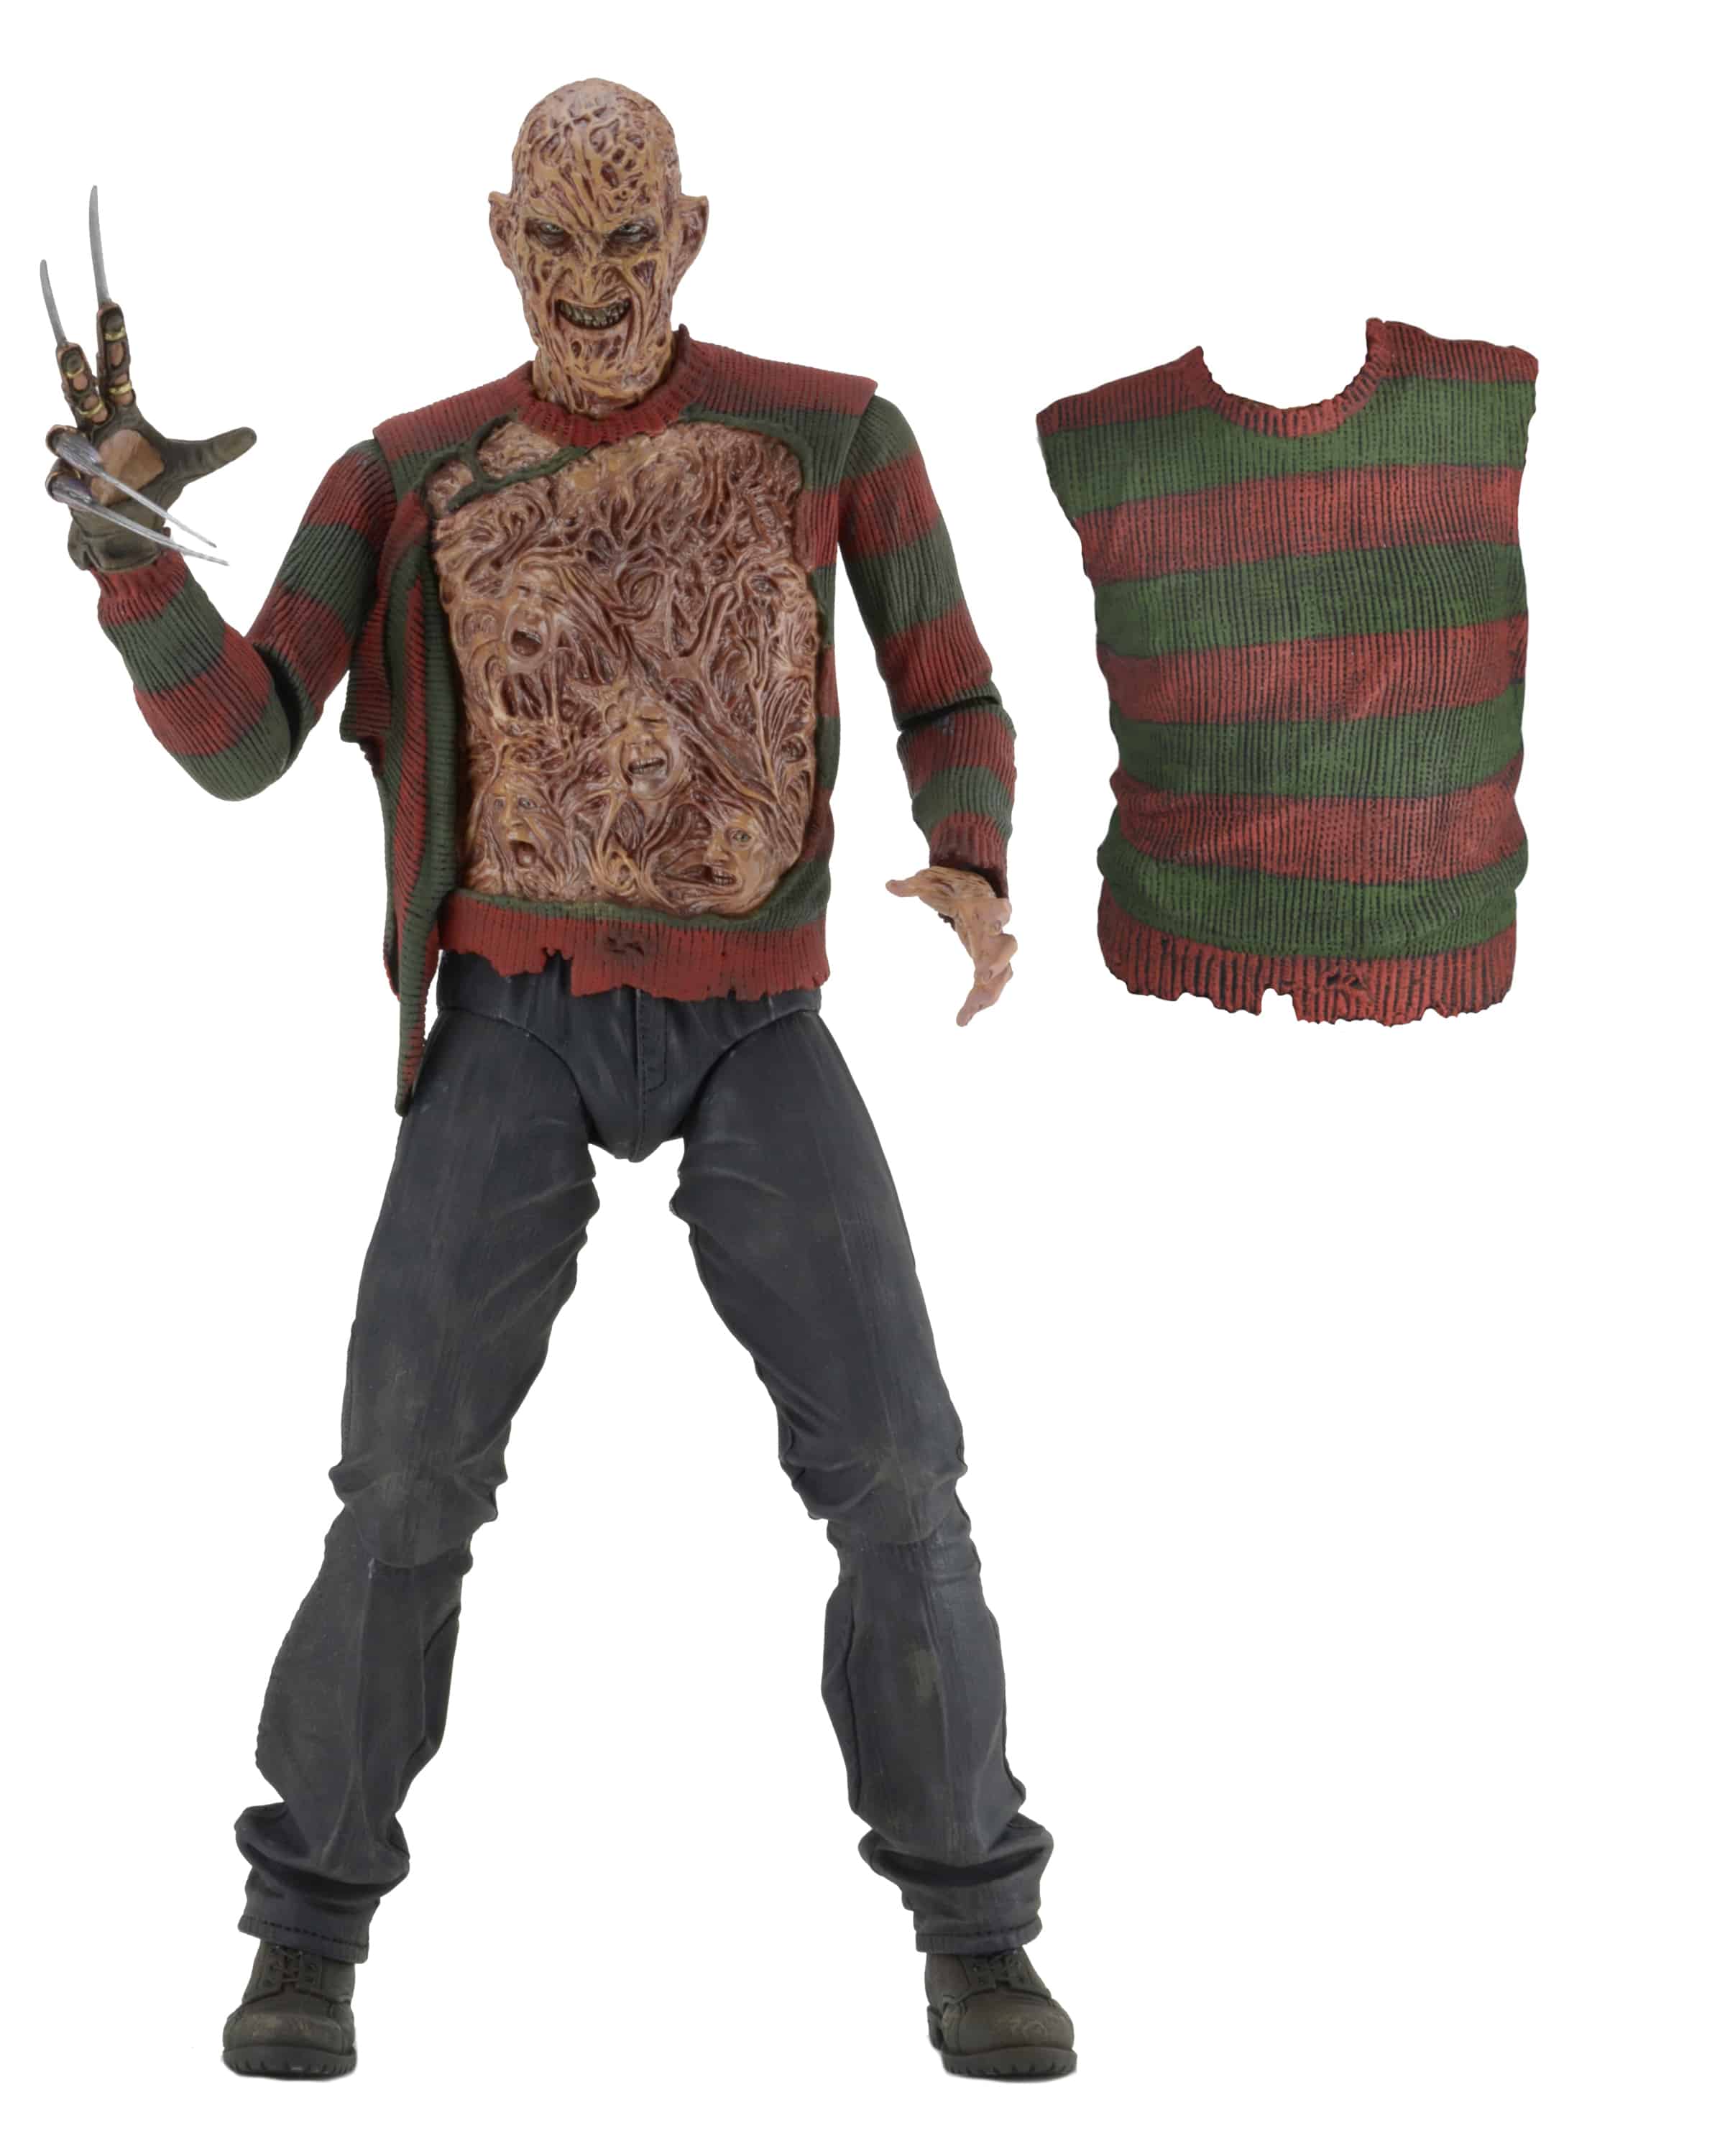 The NECA Vault reopens with limited edition Horror and Batman figures to close out 2022 5